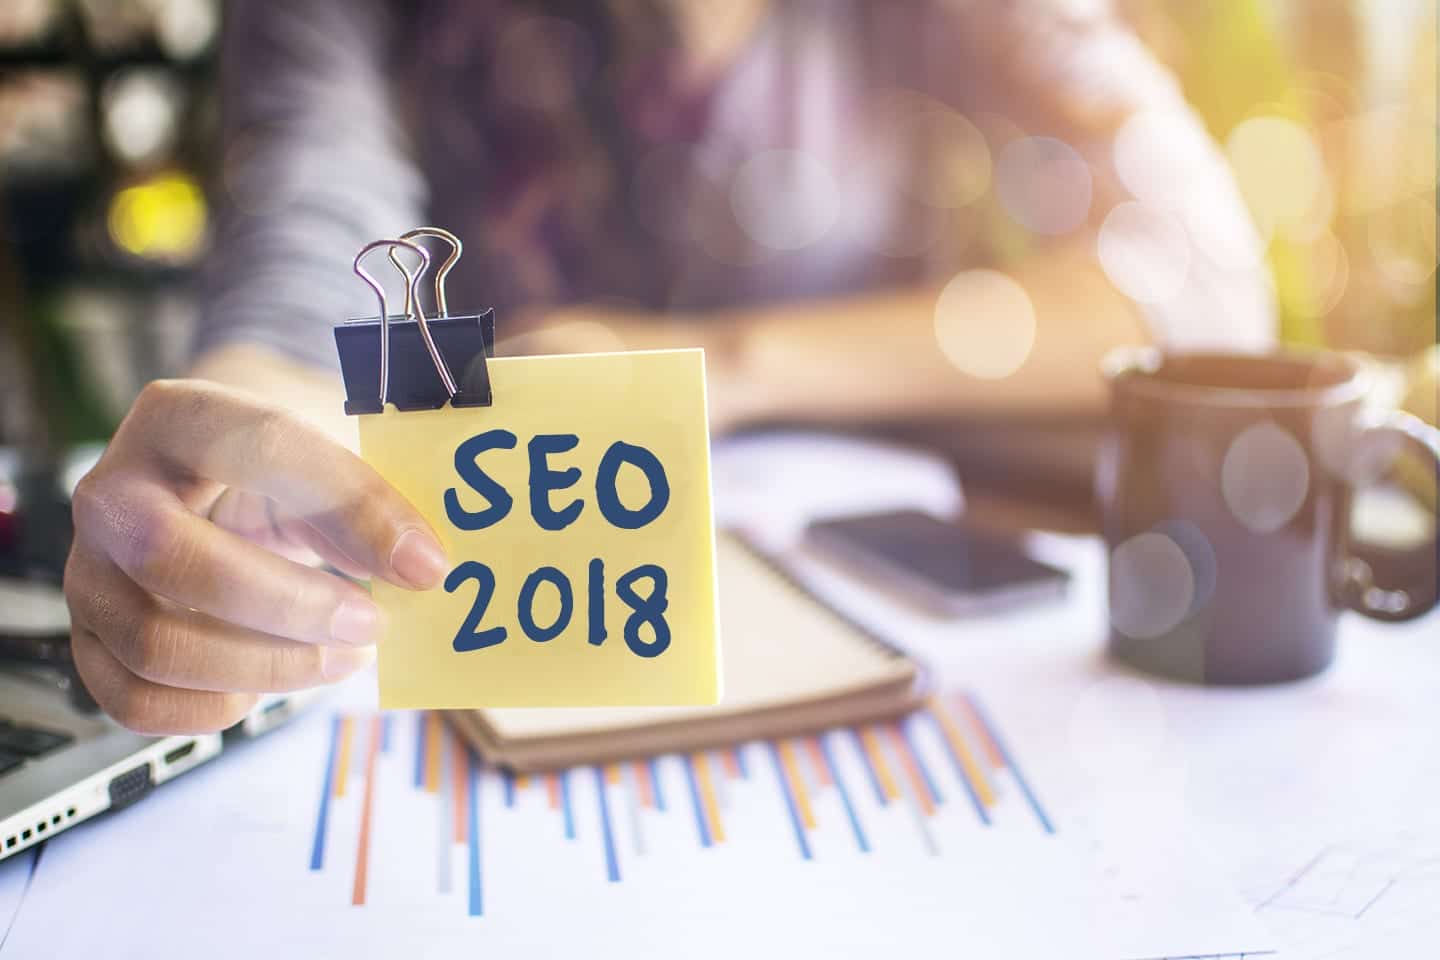 5 Not-So-Obvious Ways to Boost Your SEO in 2018